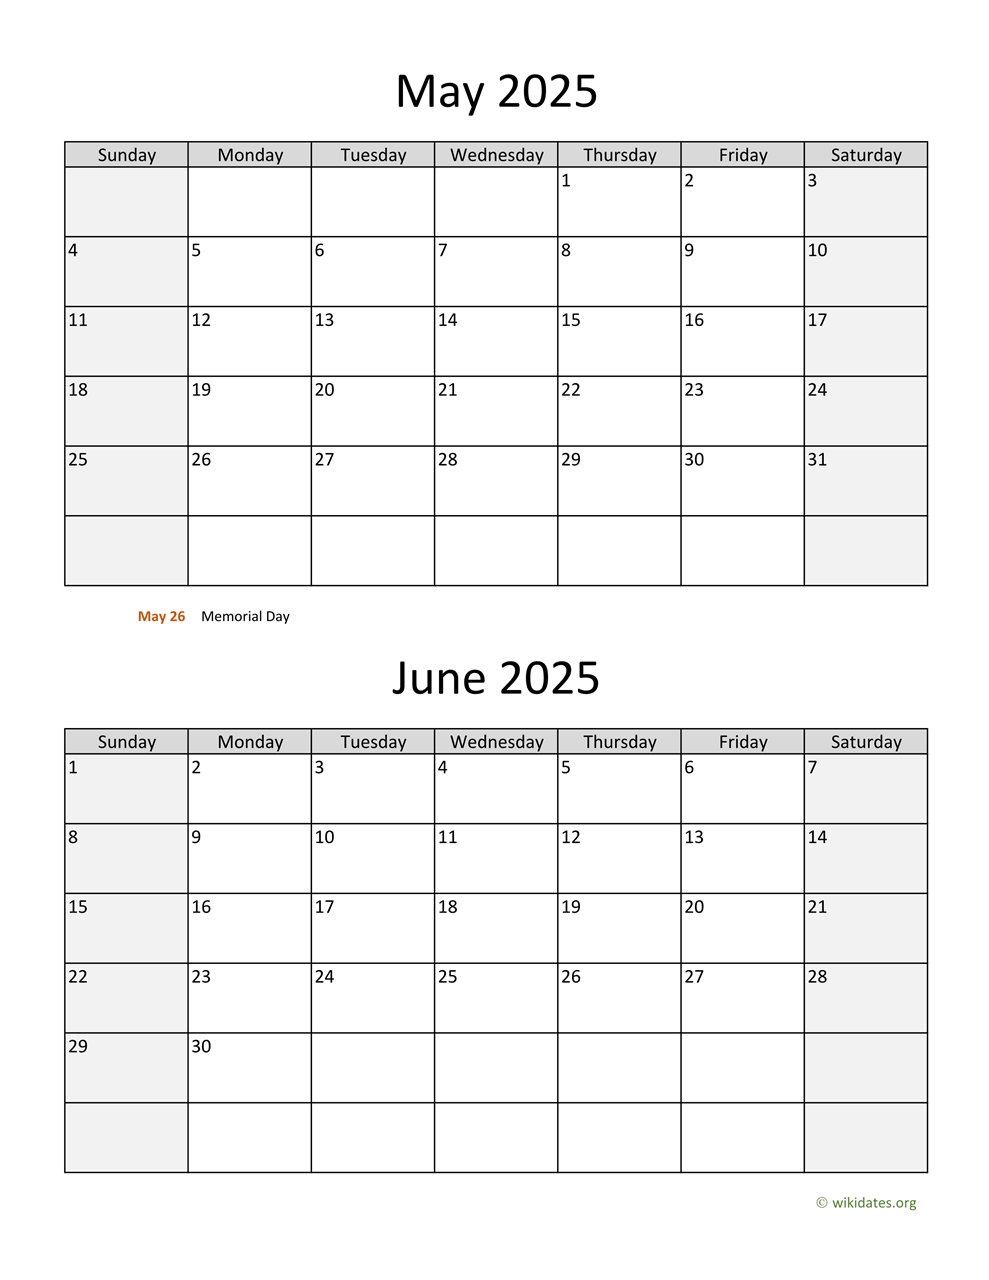 may-and-june-2025-calendar-wikidates